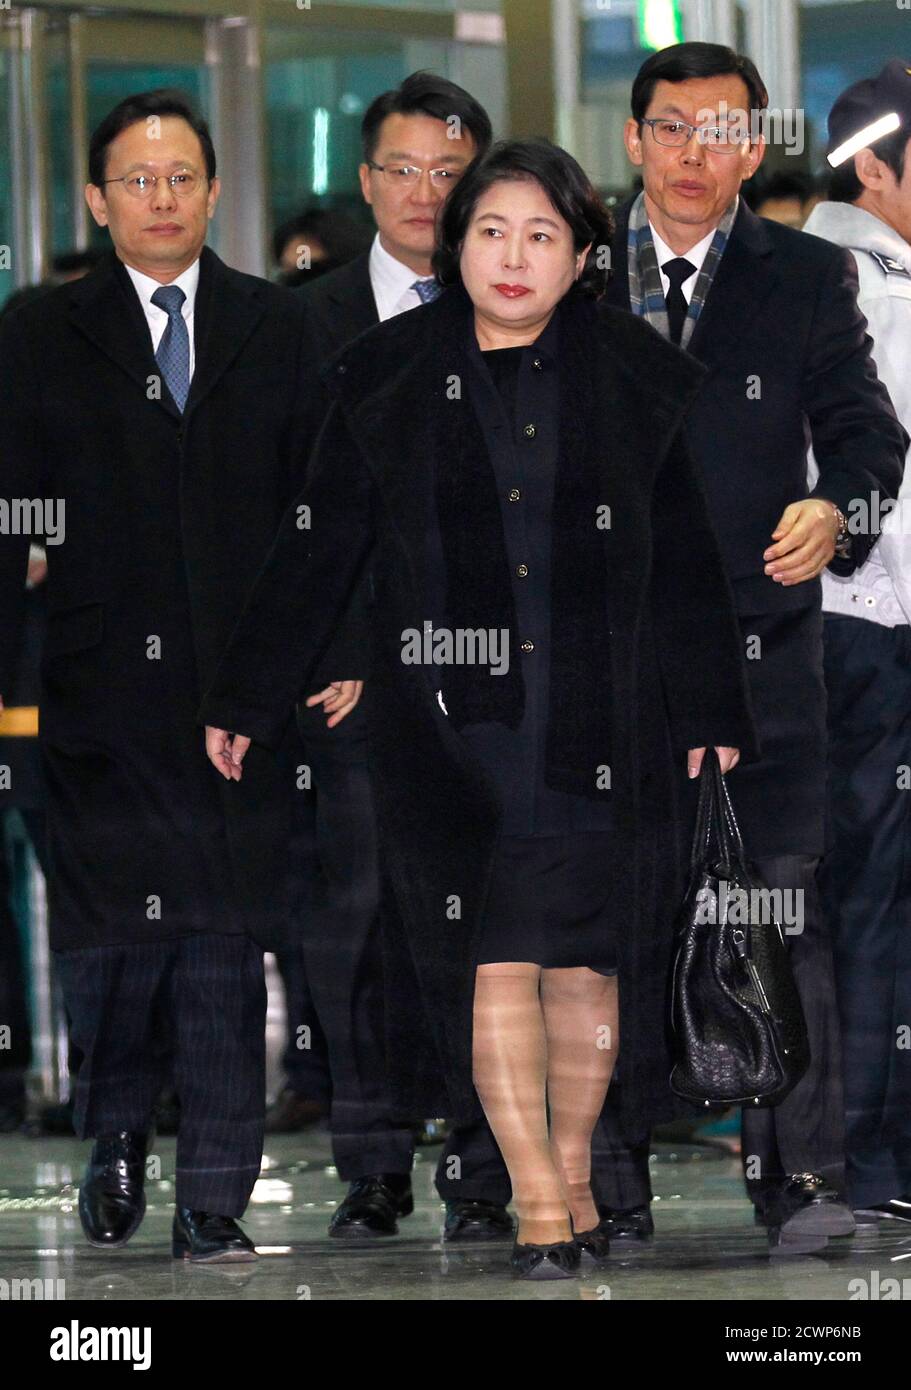 Hyundai Group chairwoman Hyun Jung-eun (C) arrives at the CIQ (customs,  immigration and quarantine) office, just south of the demilitarized zone  (DMZ) separating the two Koreas, as she leaves for Pyongyang in